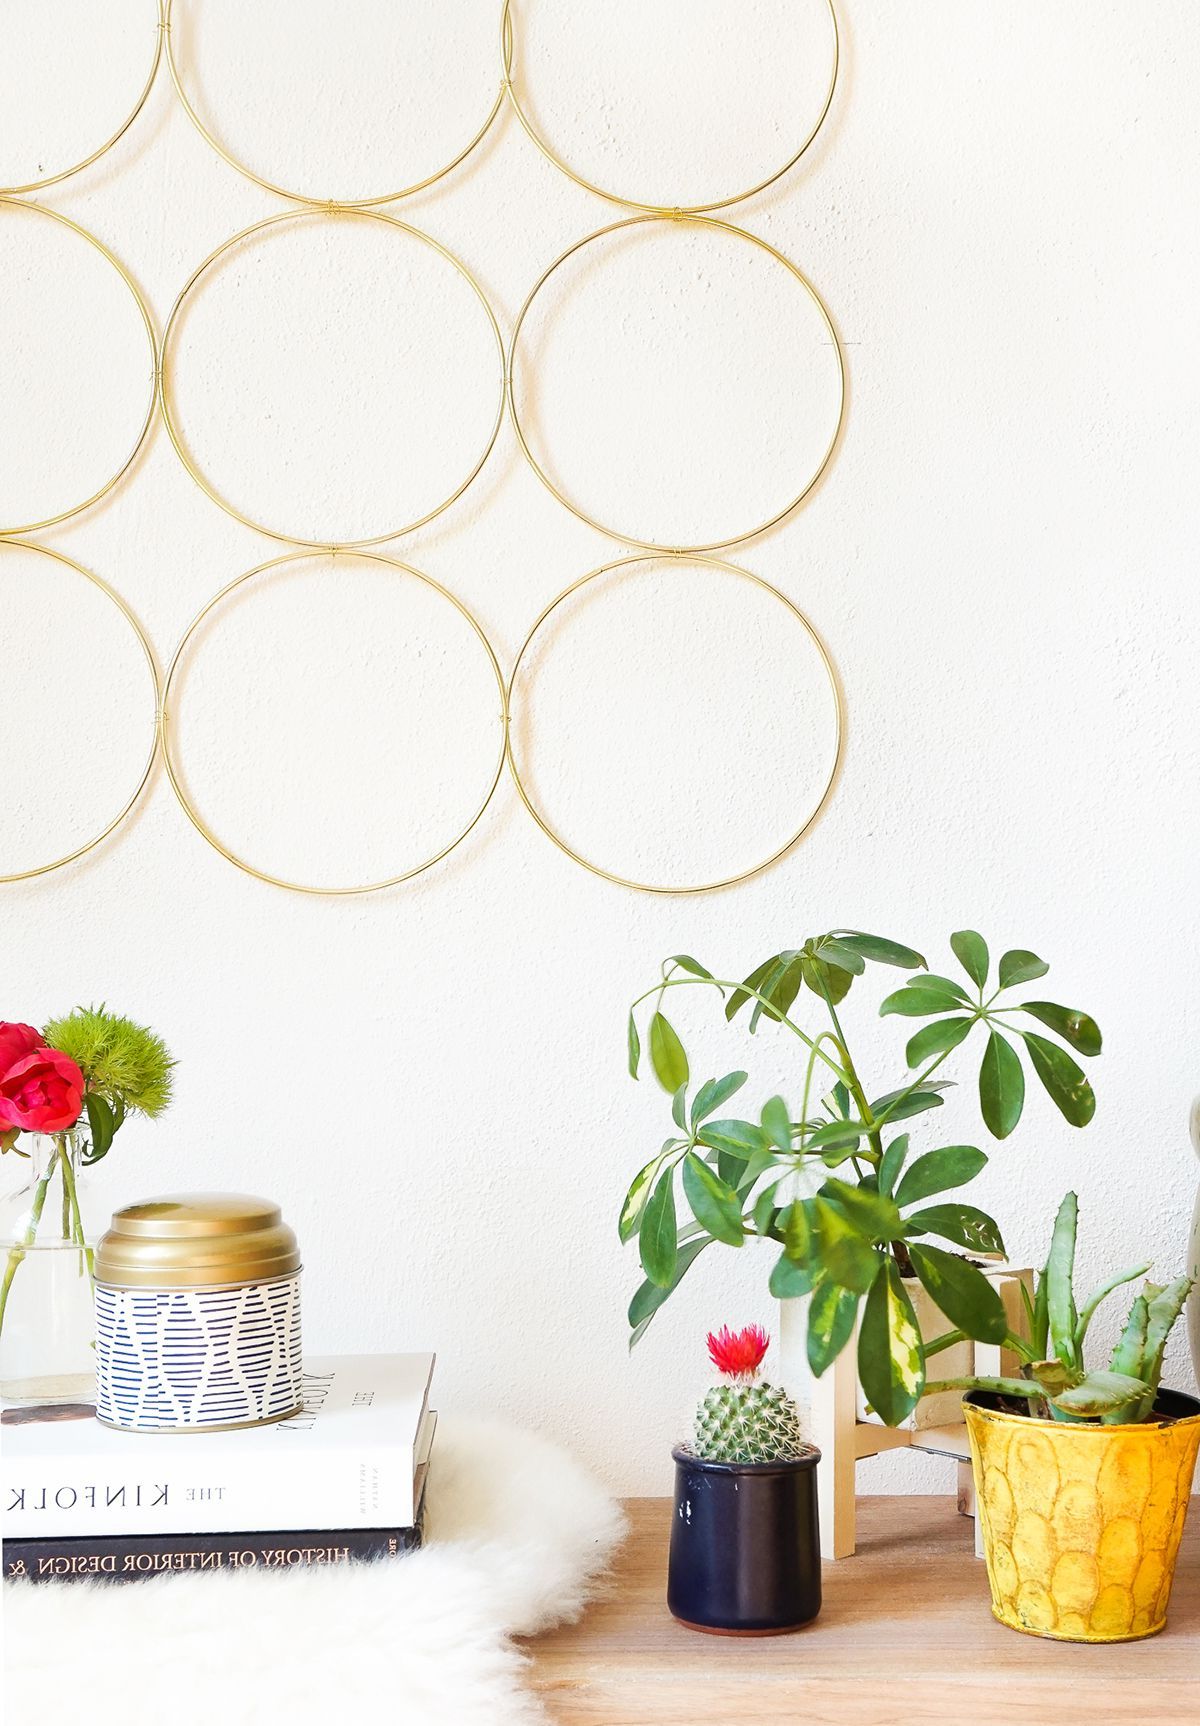 Rings Wall Décor Within Recent Diy Brass Ring Wall Decor (View 4 of 20)